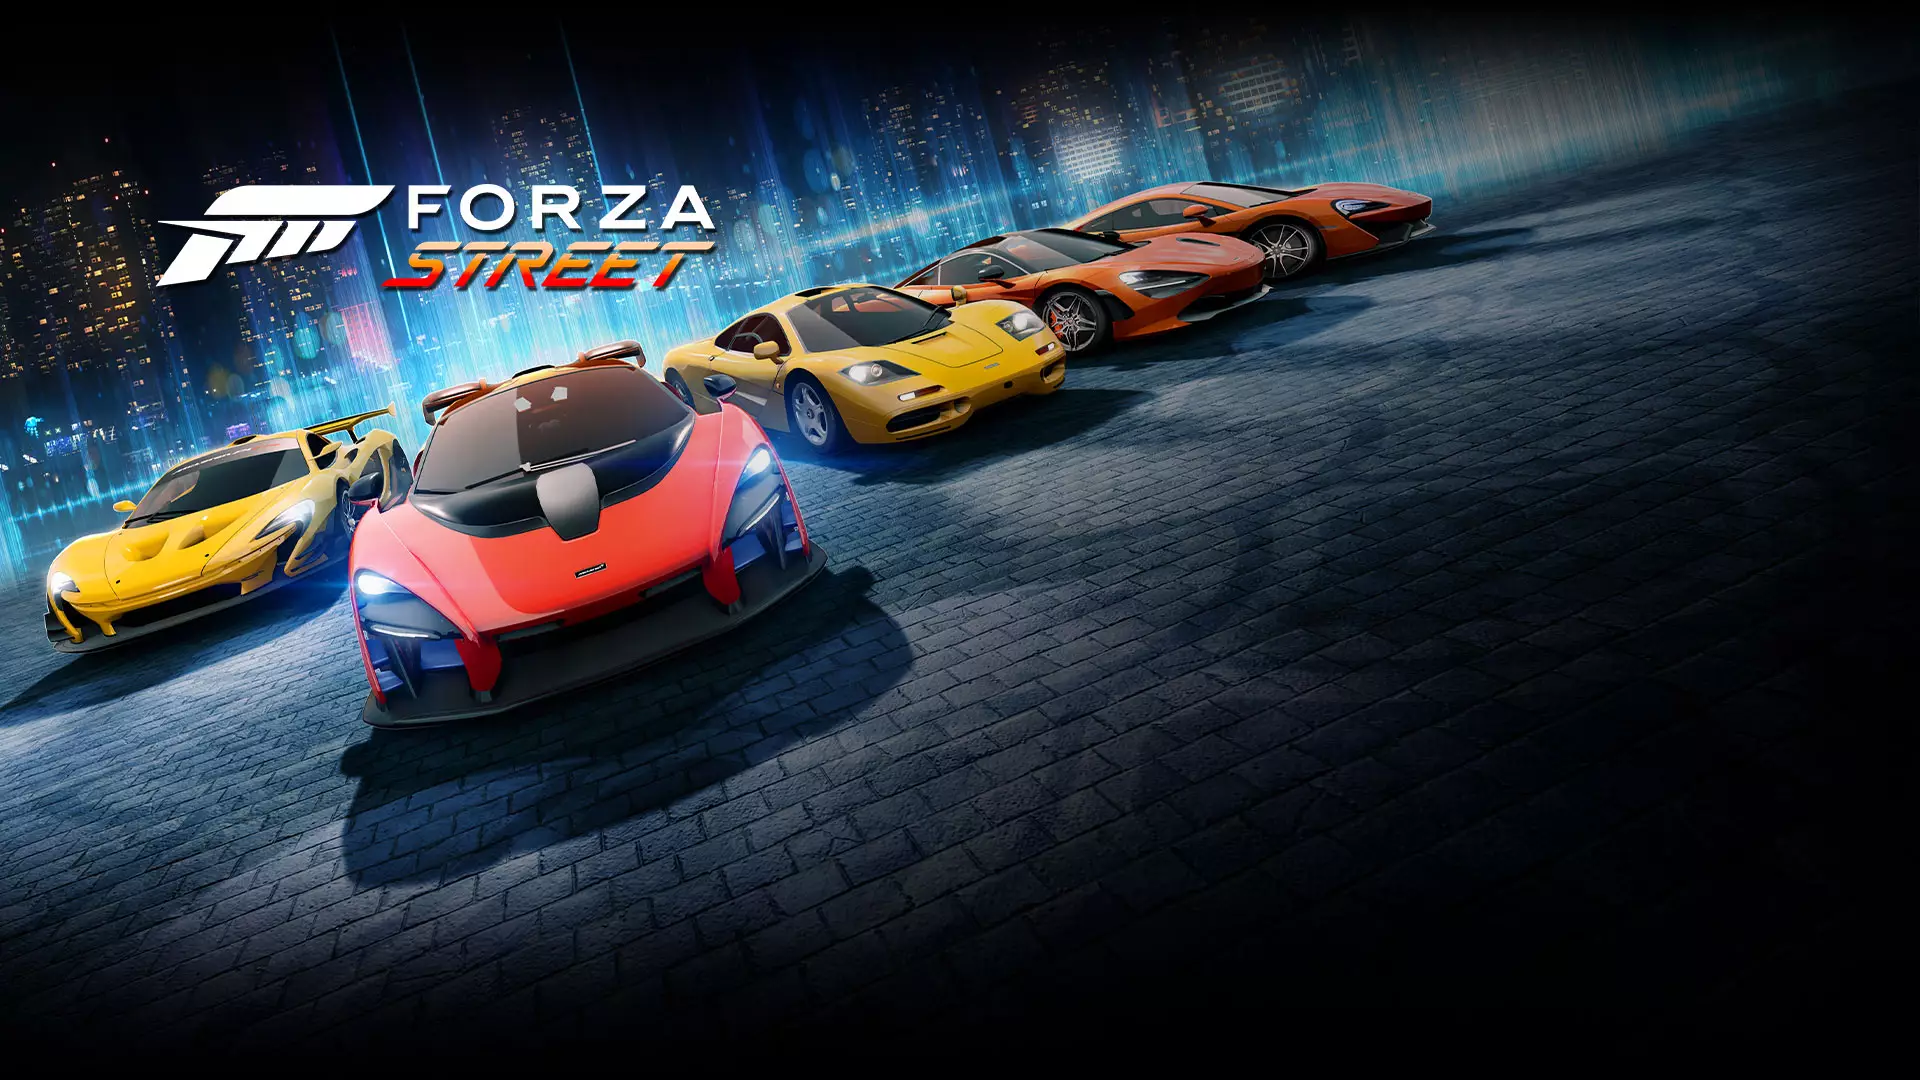 Forza Street is a game on the App Store that uses Unreal Engine /